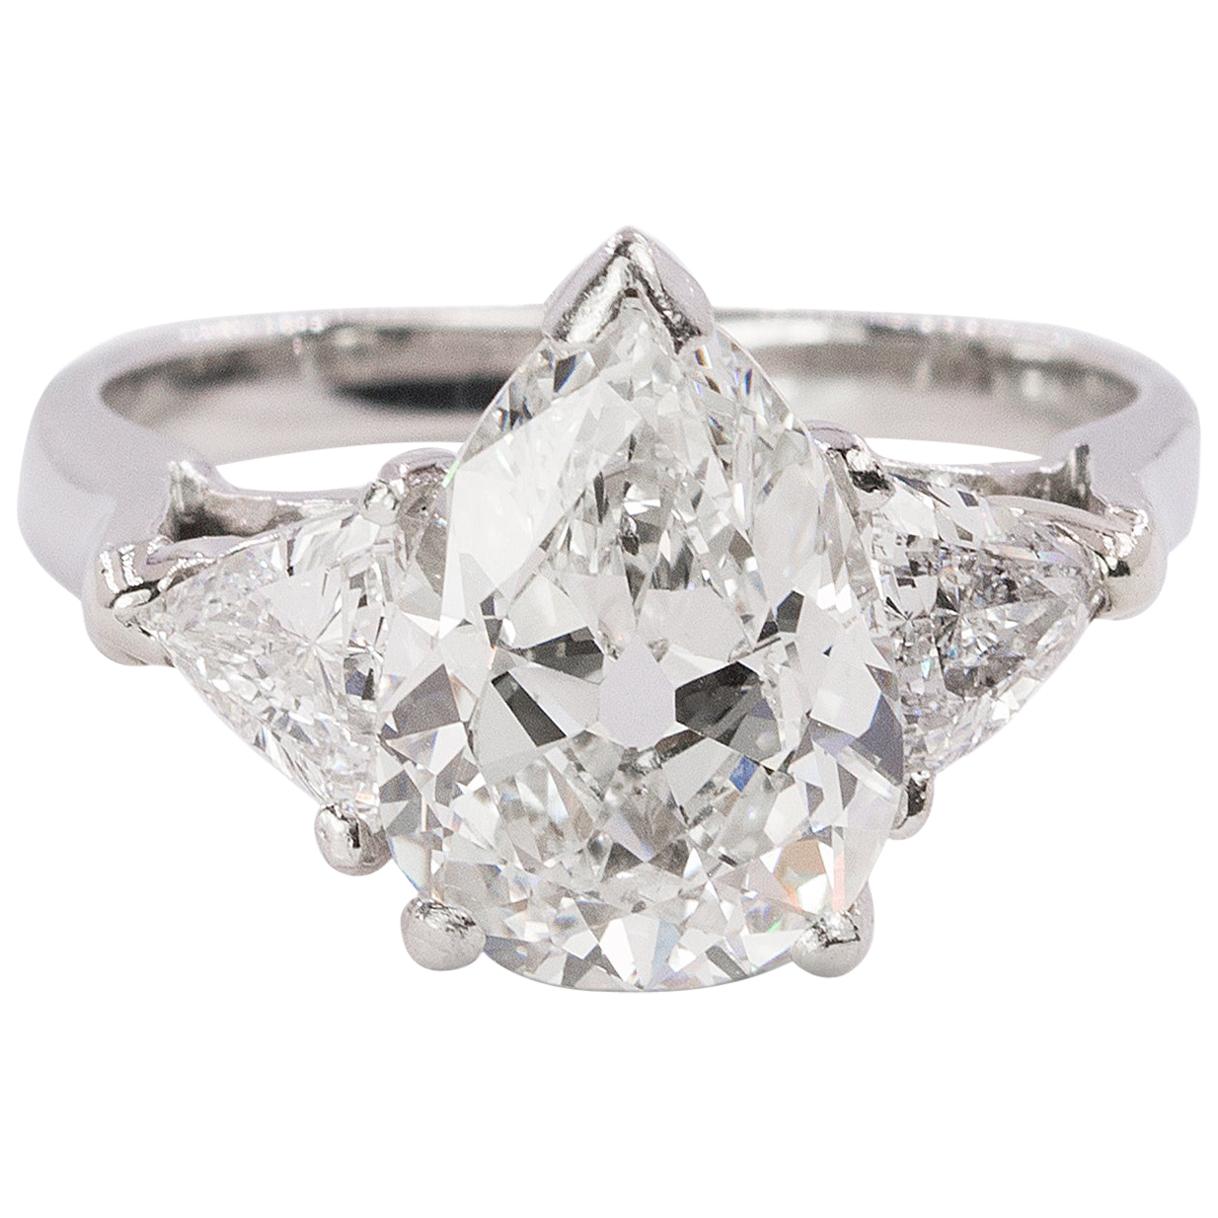 Platinum Ring with 2.91 Carat Pear Shape